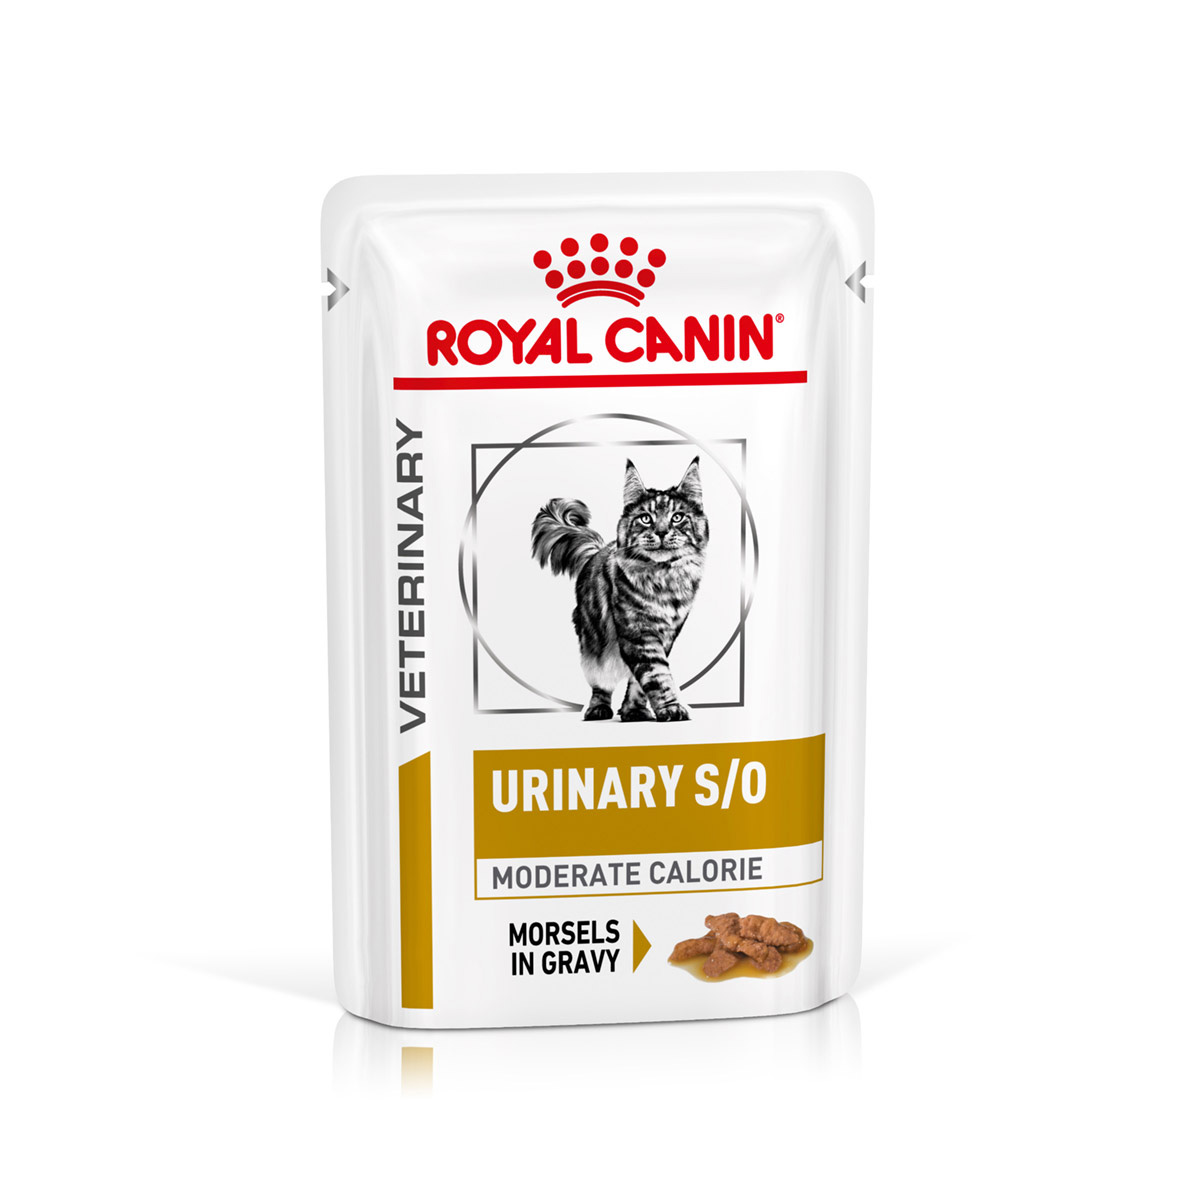 ROYAL CANIN® URINARY S/O MODERATE CALORIE Häppchen in Soße 48x85g von Royal Canin